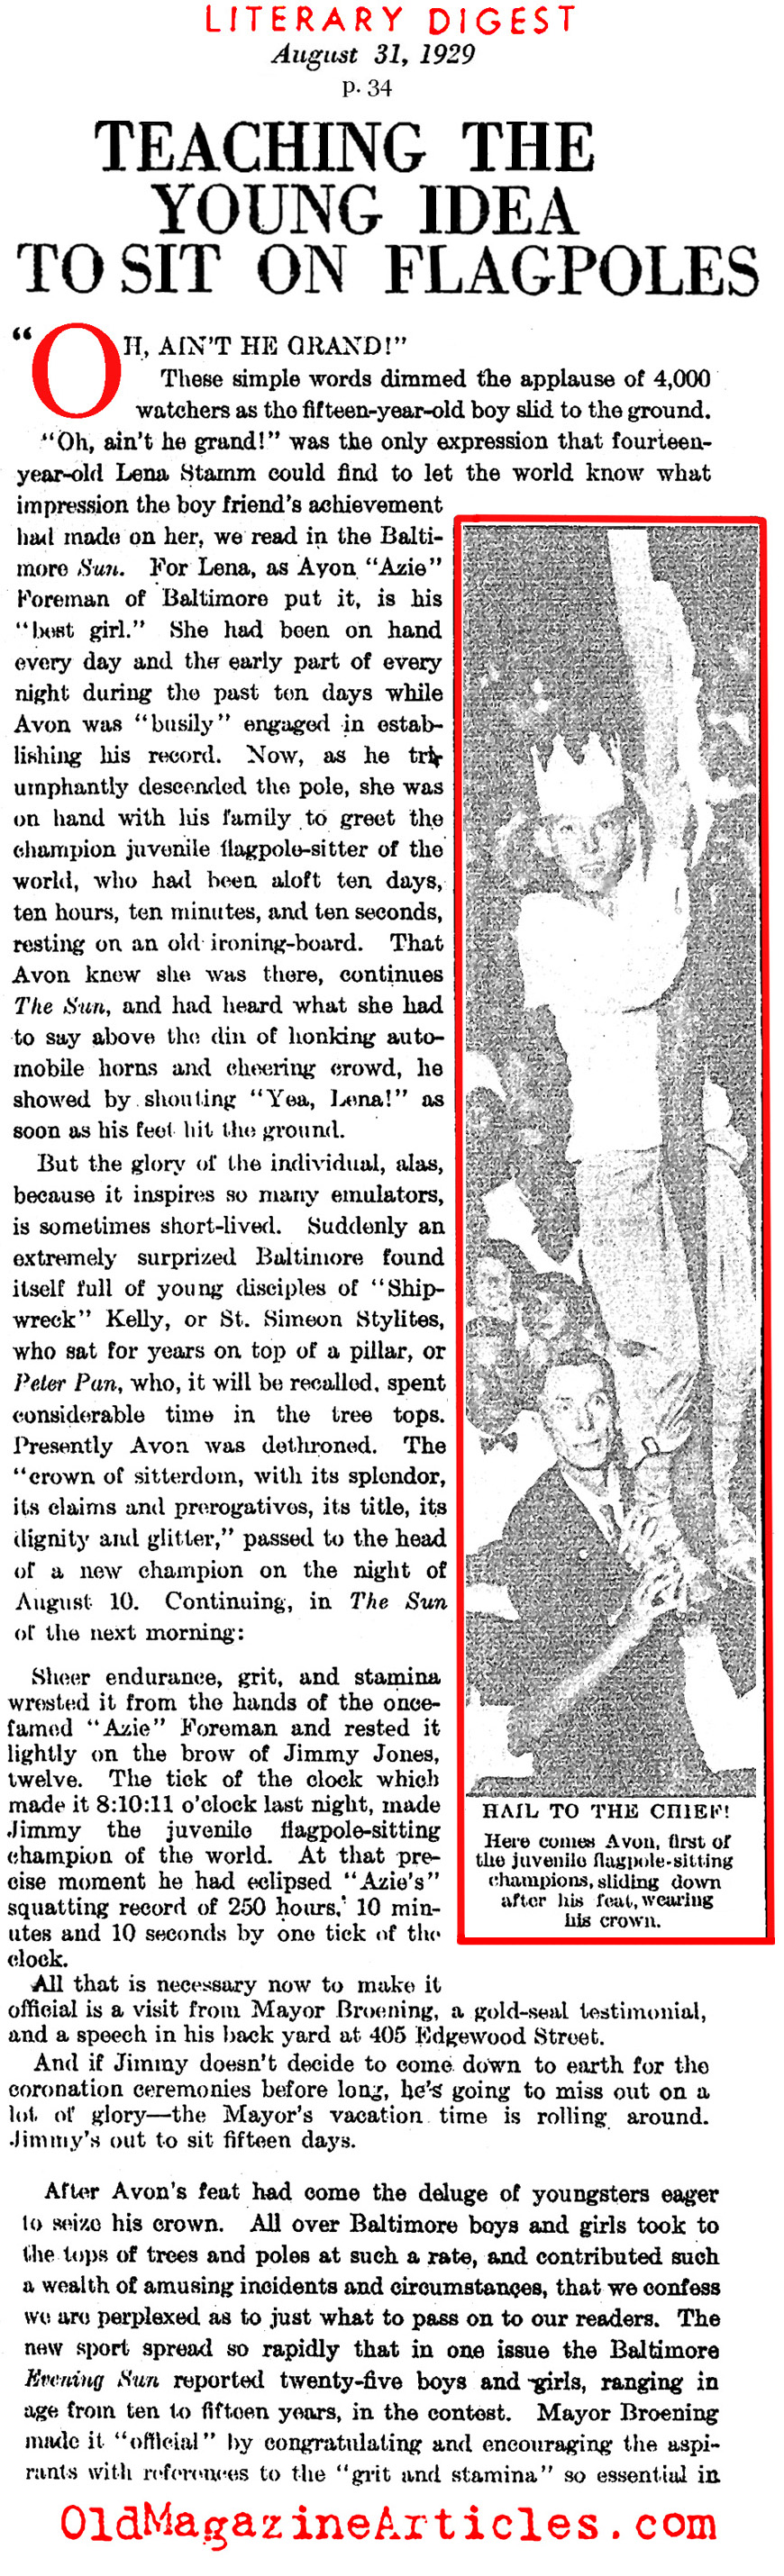 The 1920s Craze for Flagpole Sitting (Literary Digest, 1929)